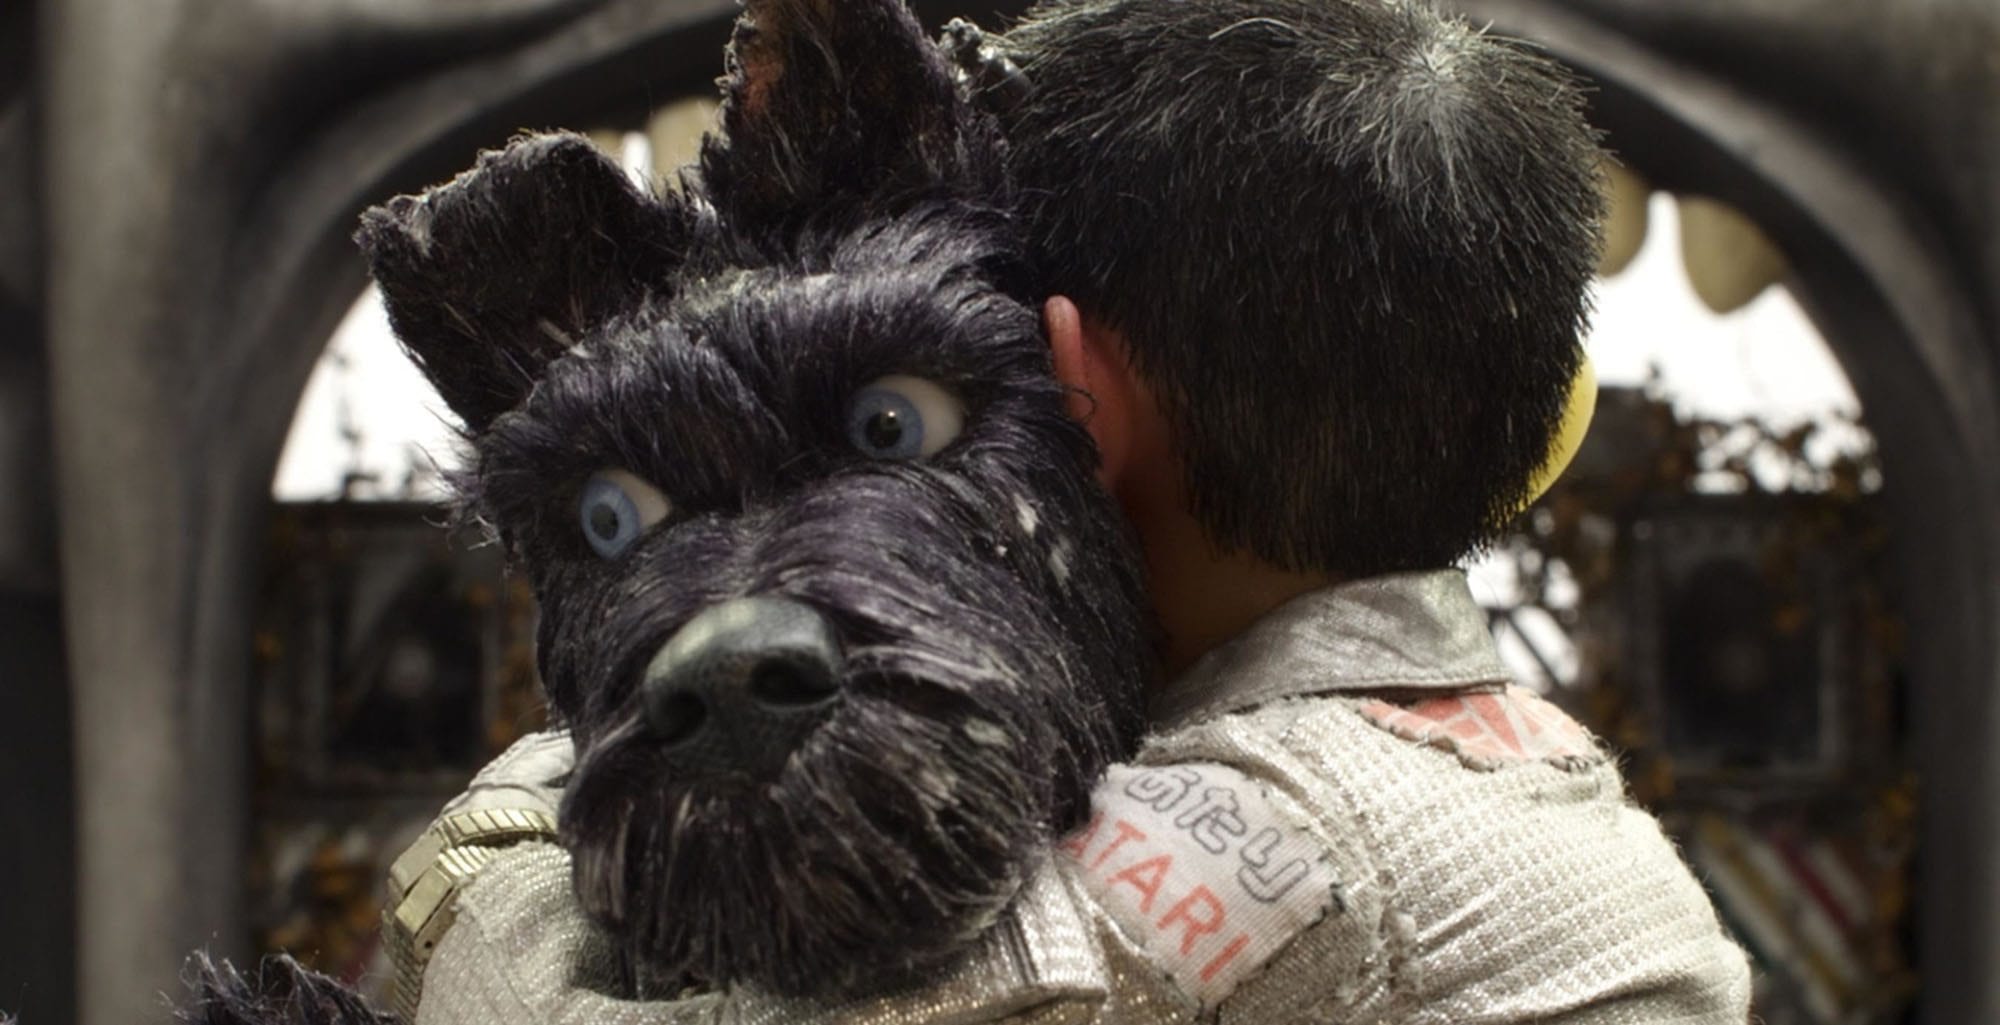 We got hold of some behind-the-scenes featurettes on the making of Wes Anderson's spectacular stop-motion 'Isle of Dogs' for you to feast your eyes on.